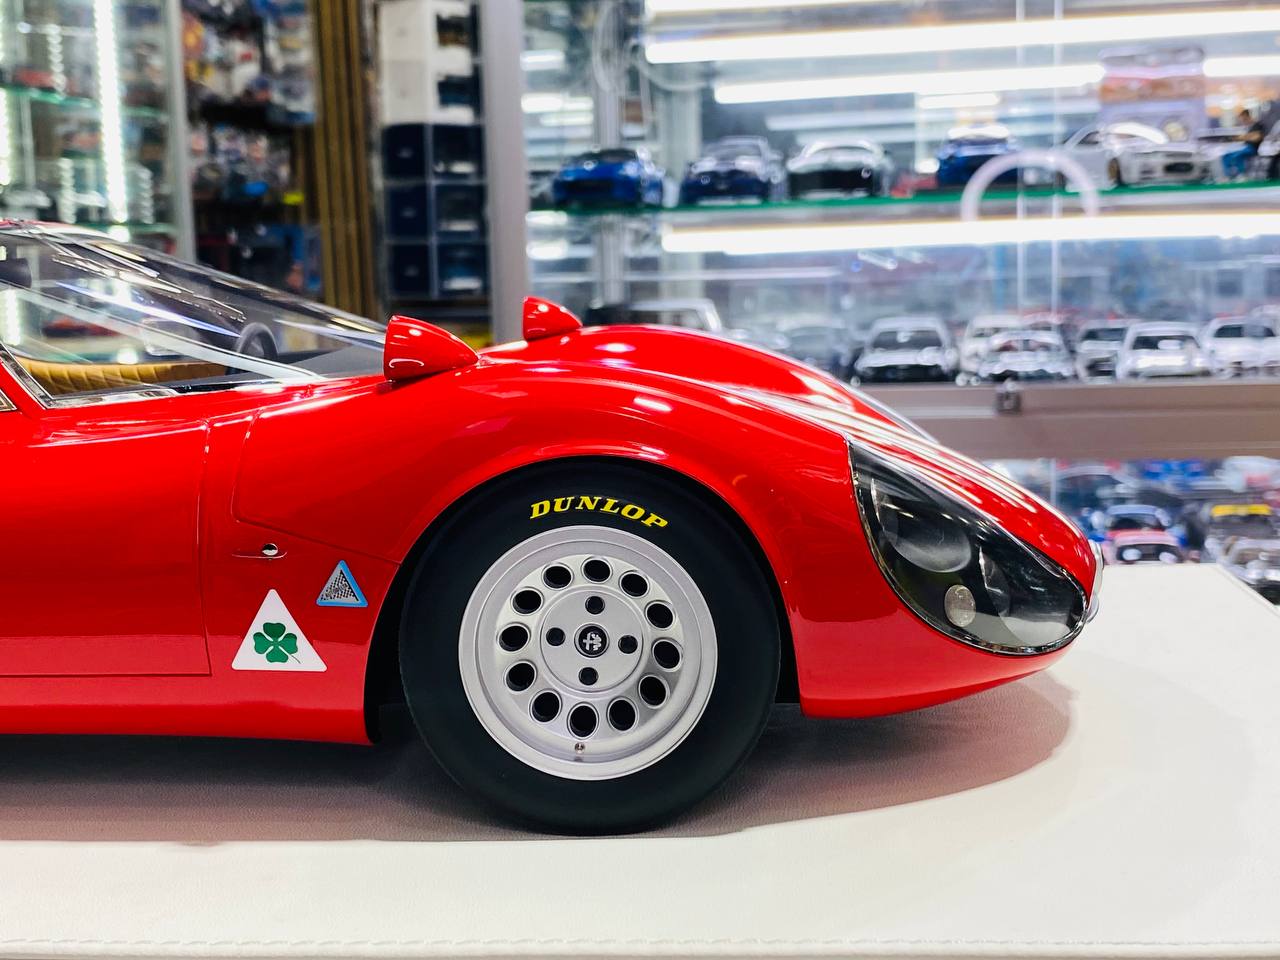 1/8 Resin DMH Alfa Romeo Tipo 33/2 Stradale Model Car - Mark Red (Limited Edition)